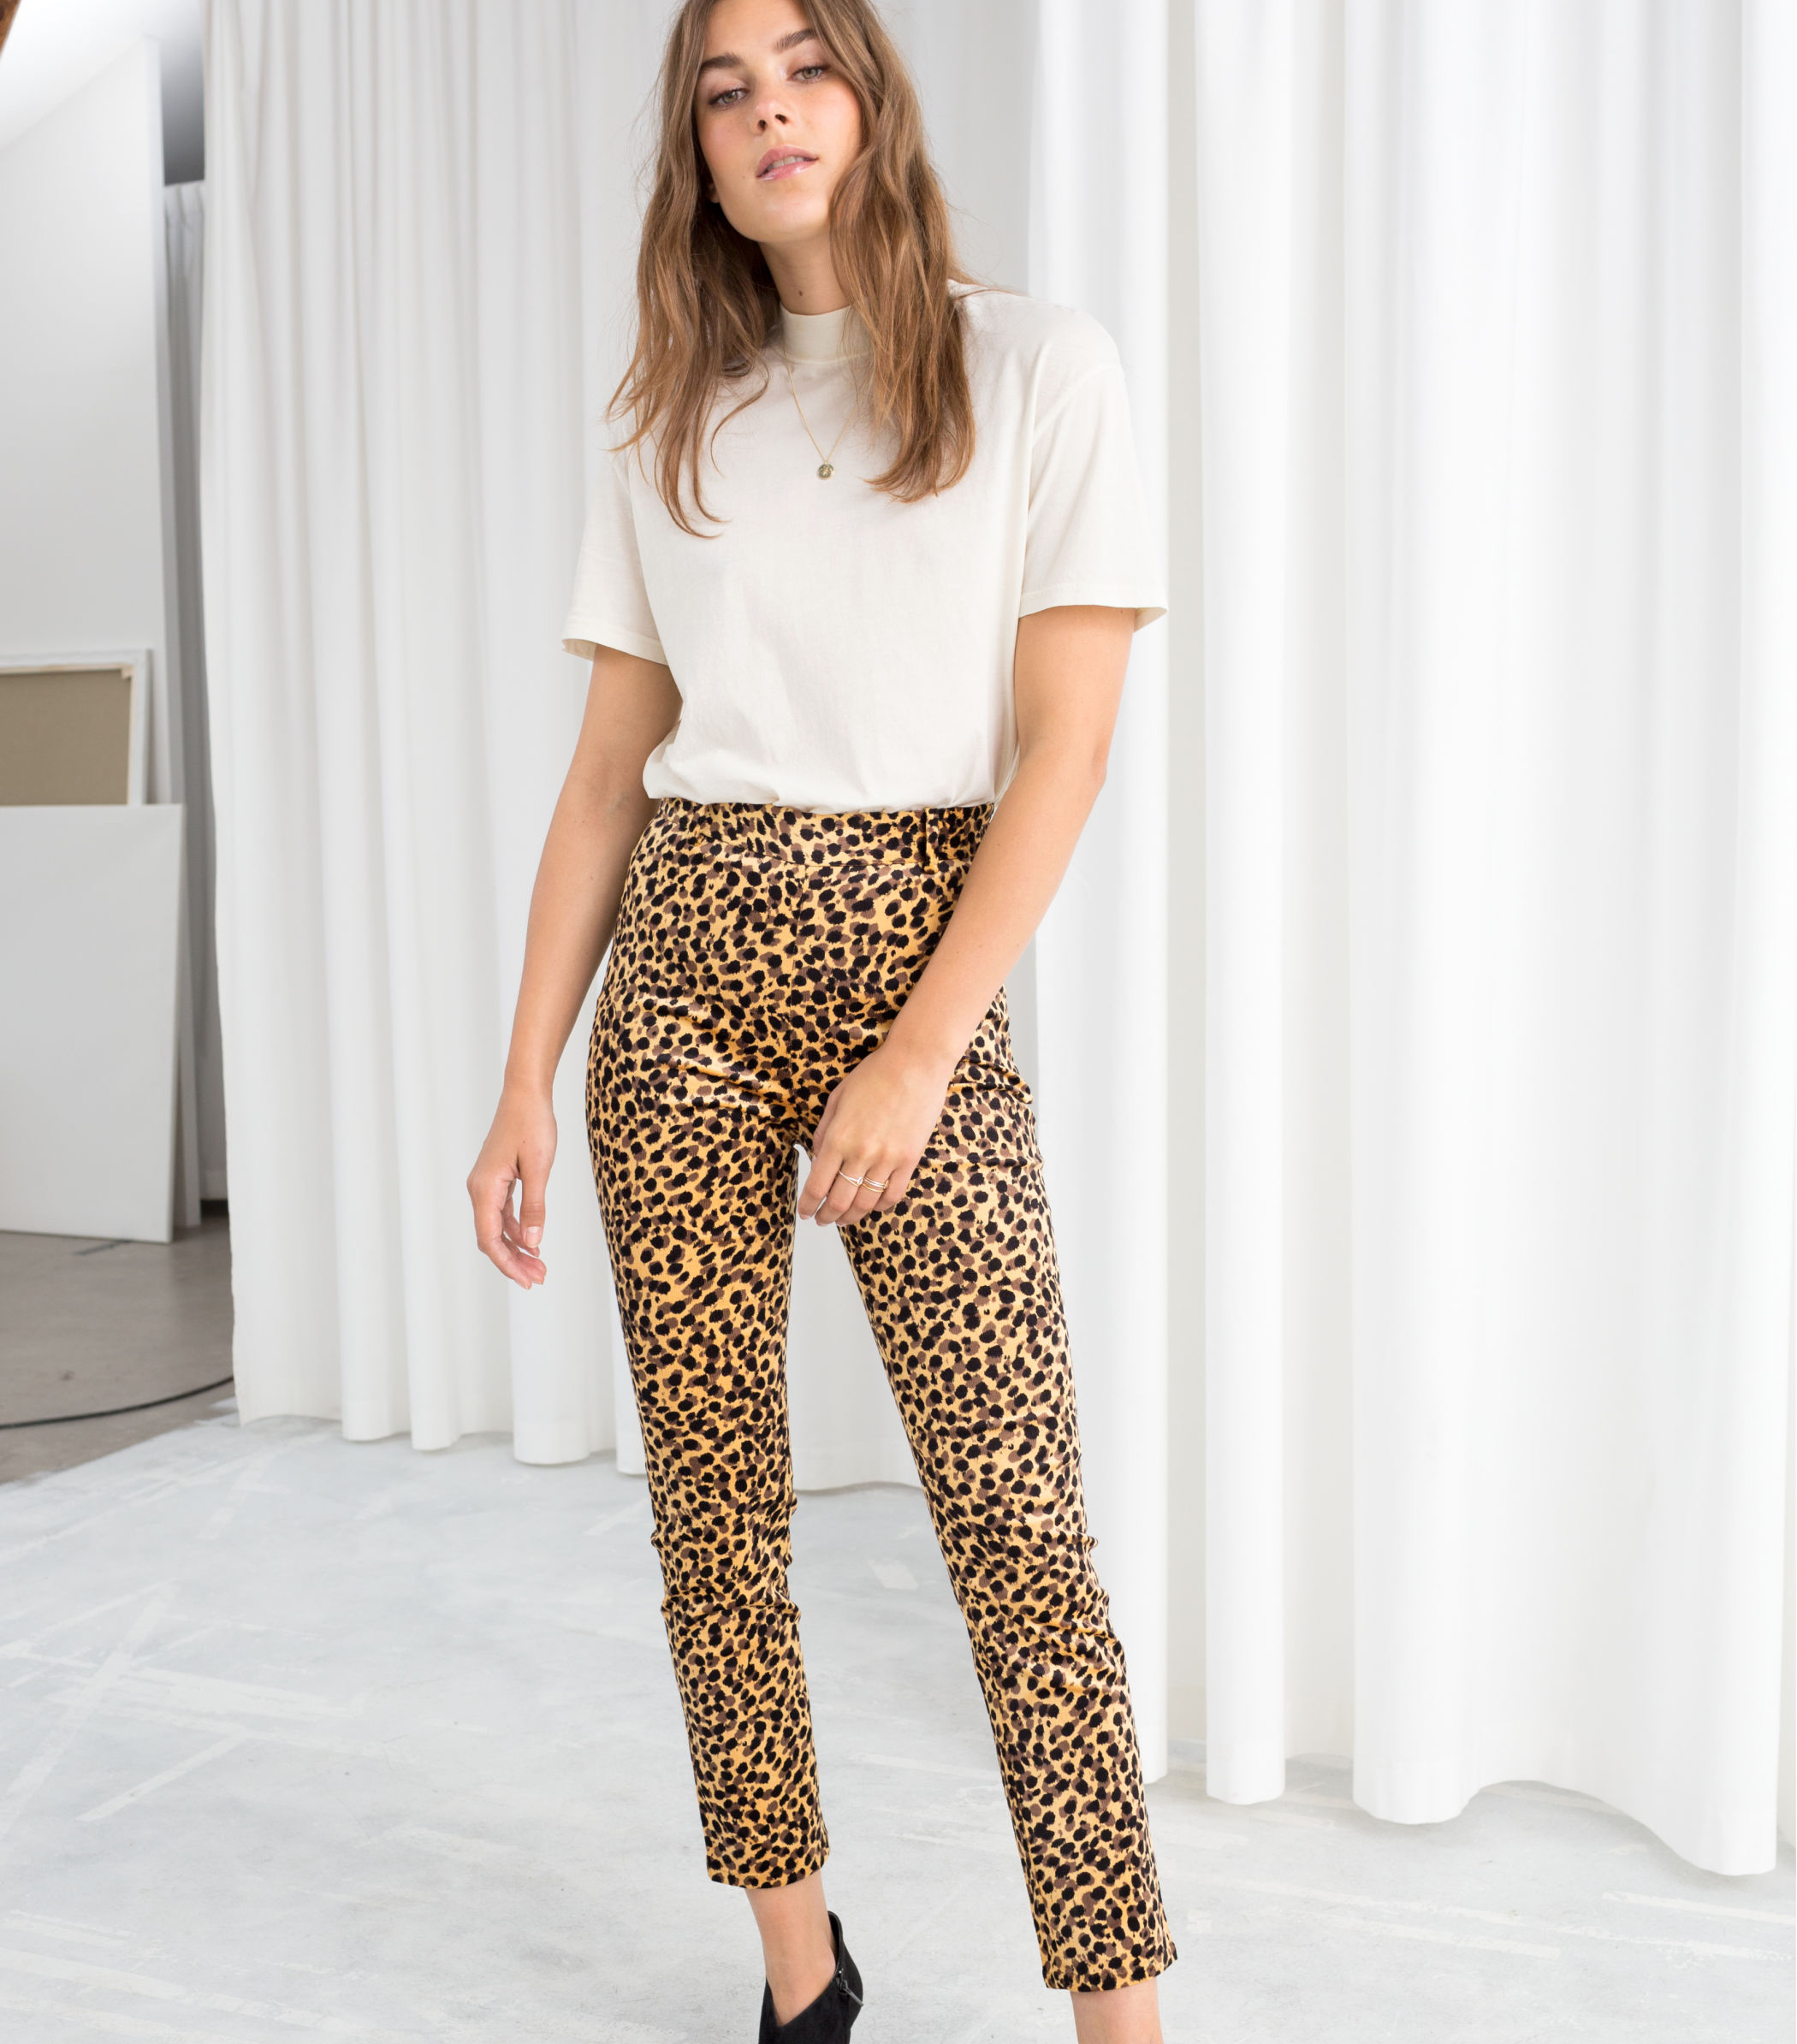 25 Pairs of Leopard Print Pants We Love | Who What Wear